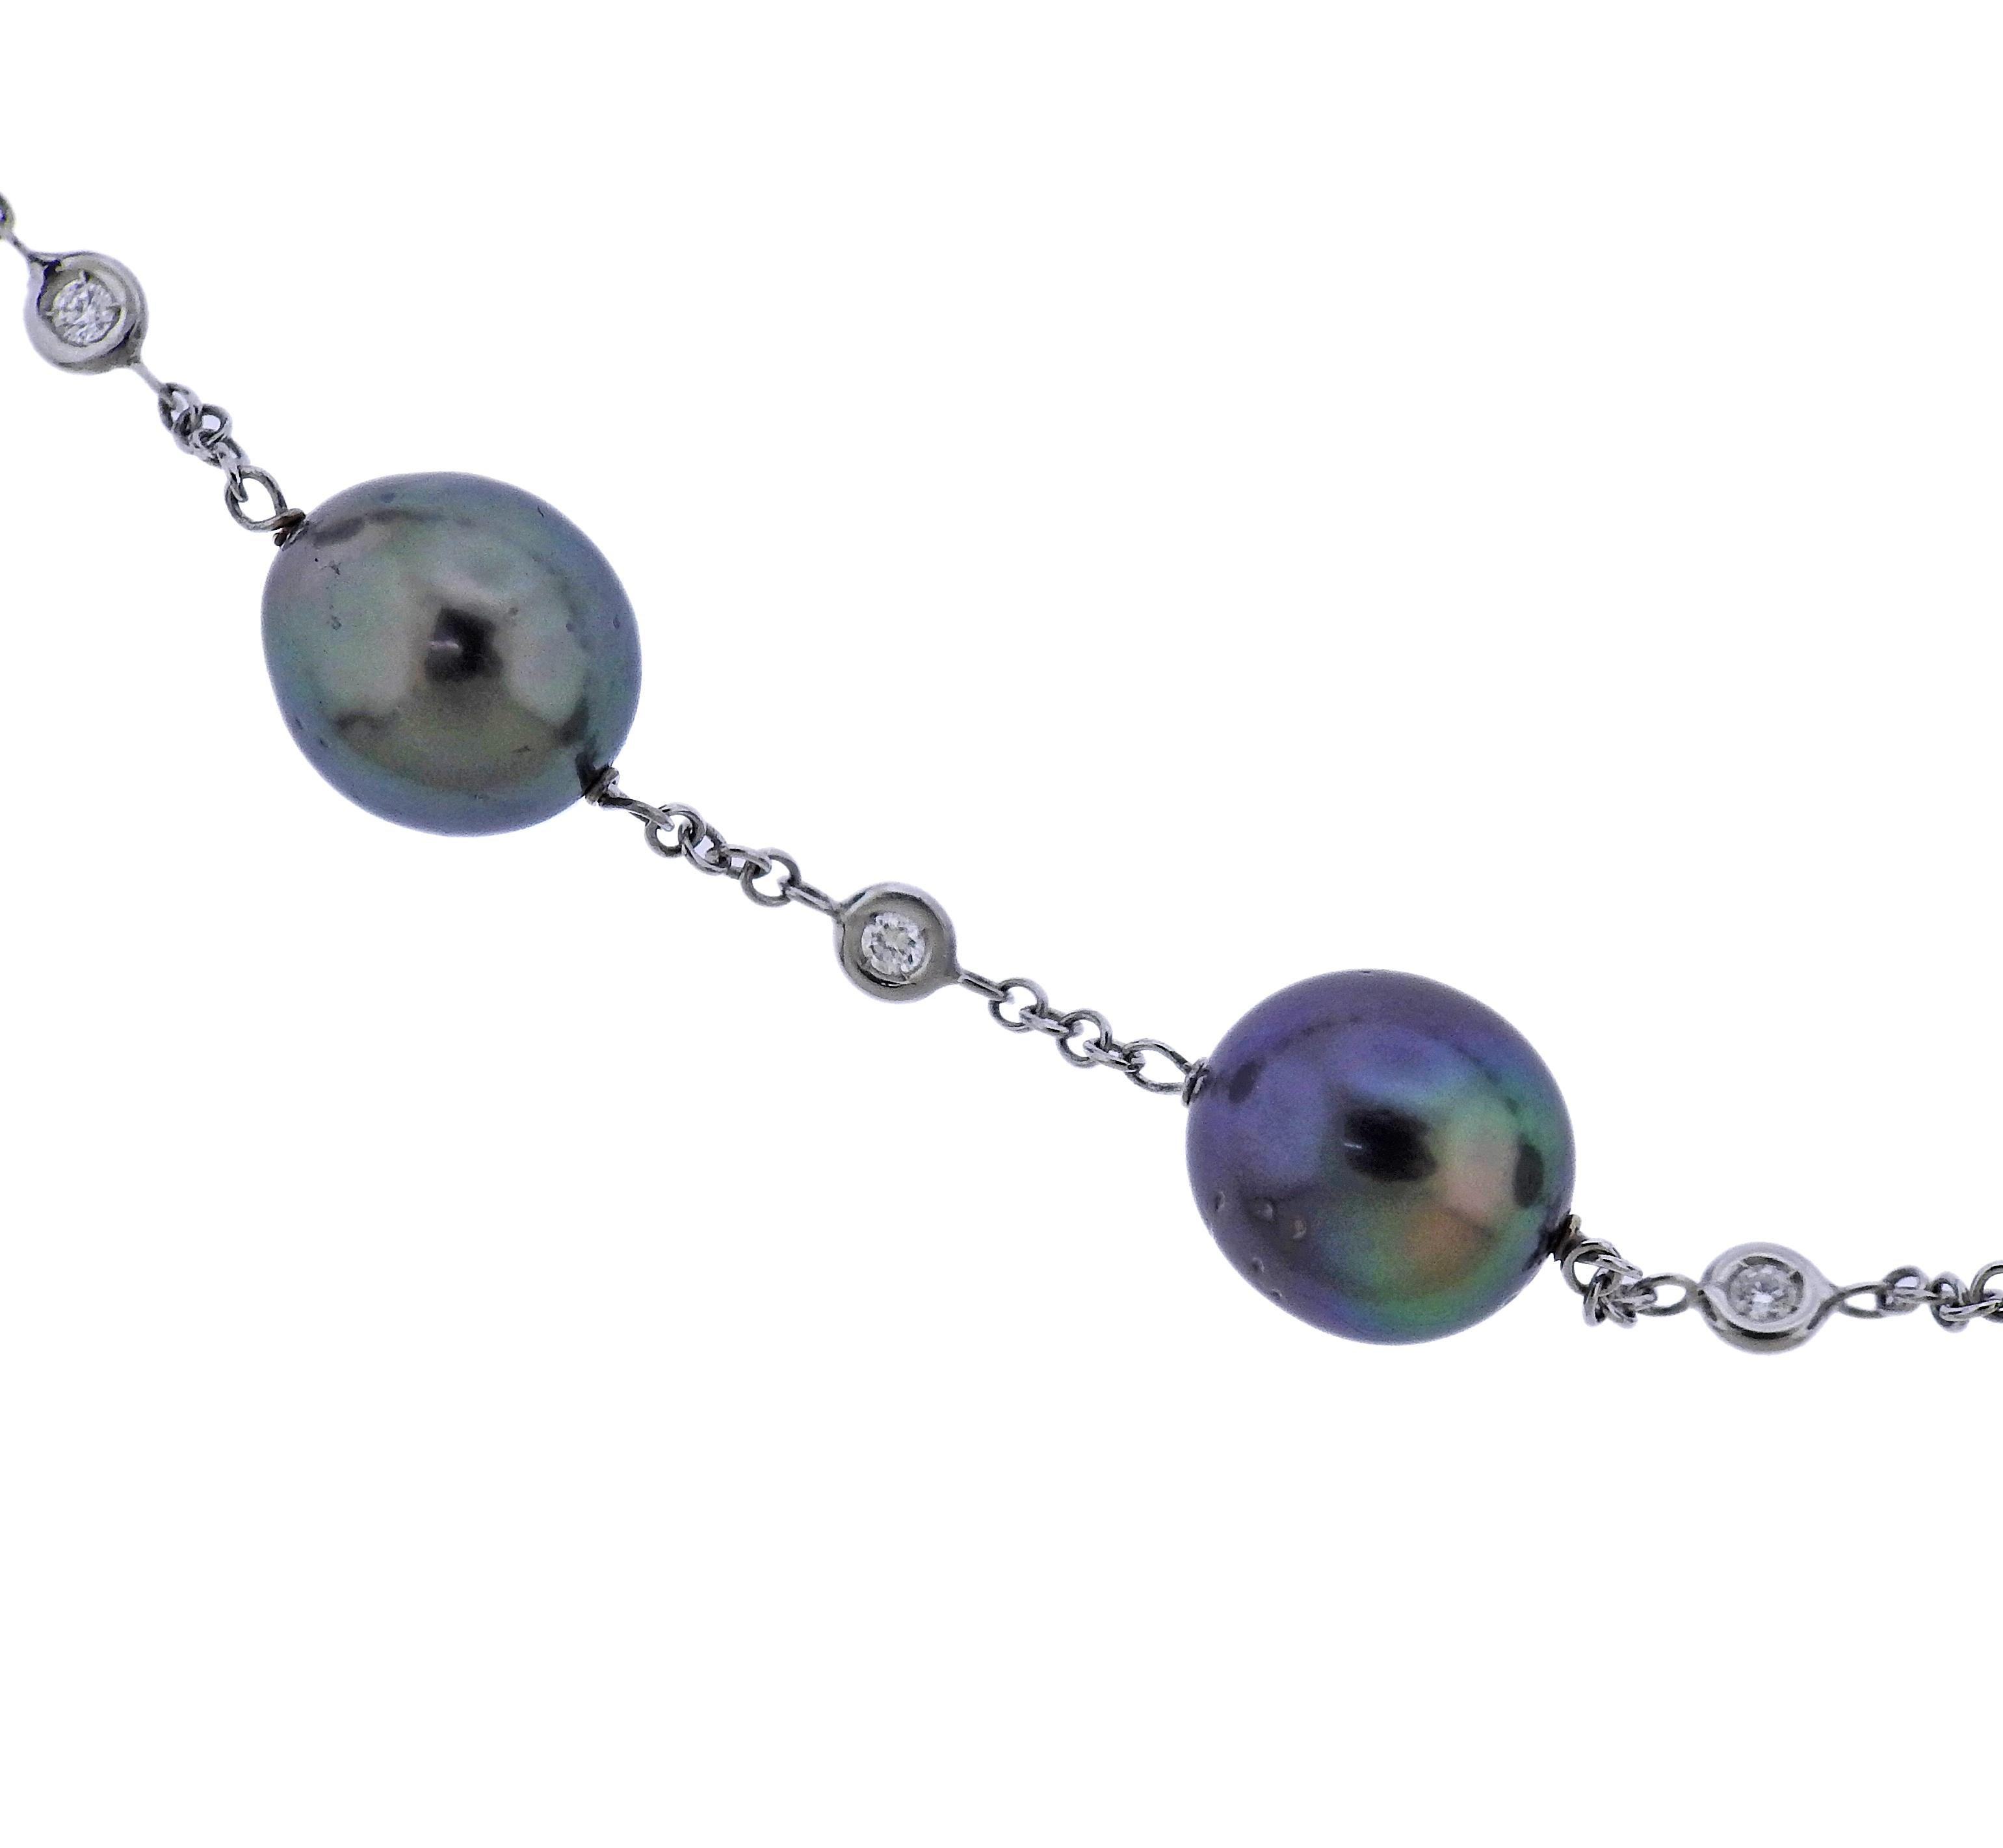 Classic 18k white gold station necklace, featuring South Sea Tahitian pearls, measuring from approx. 10 x 11mm to 12 x 13.5mm, surrounded with diamonds - total approx. 0.75ctw H/Si1 diamonds. Necklace is 20